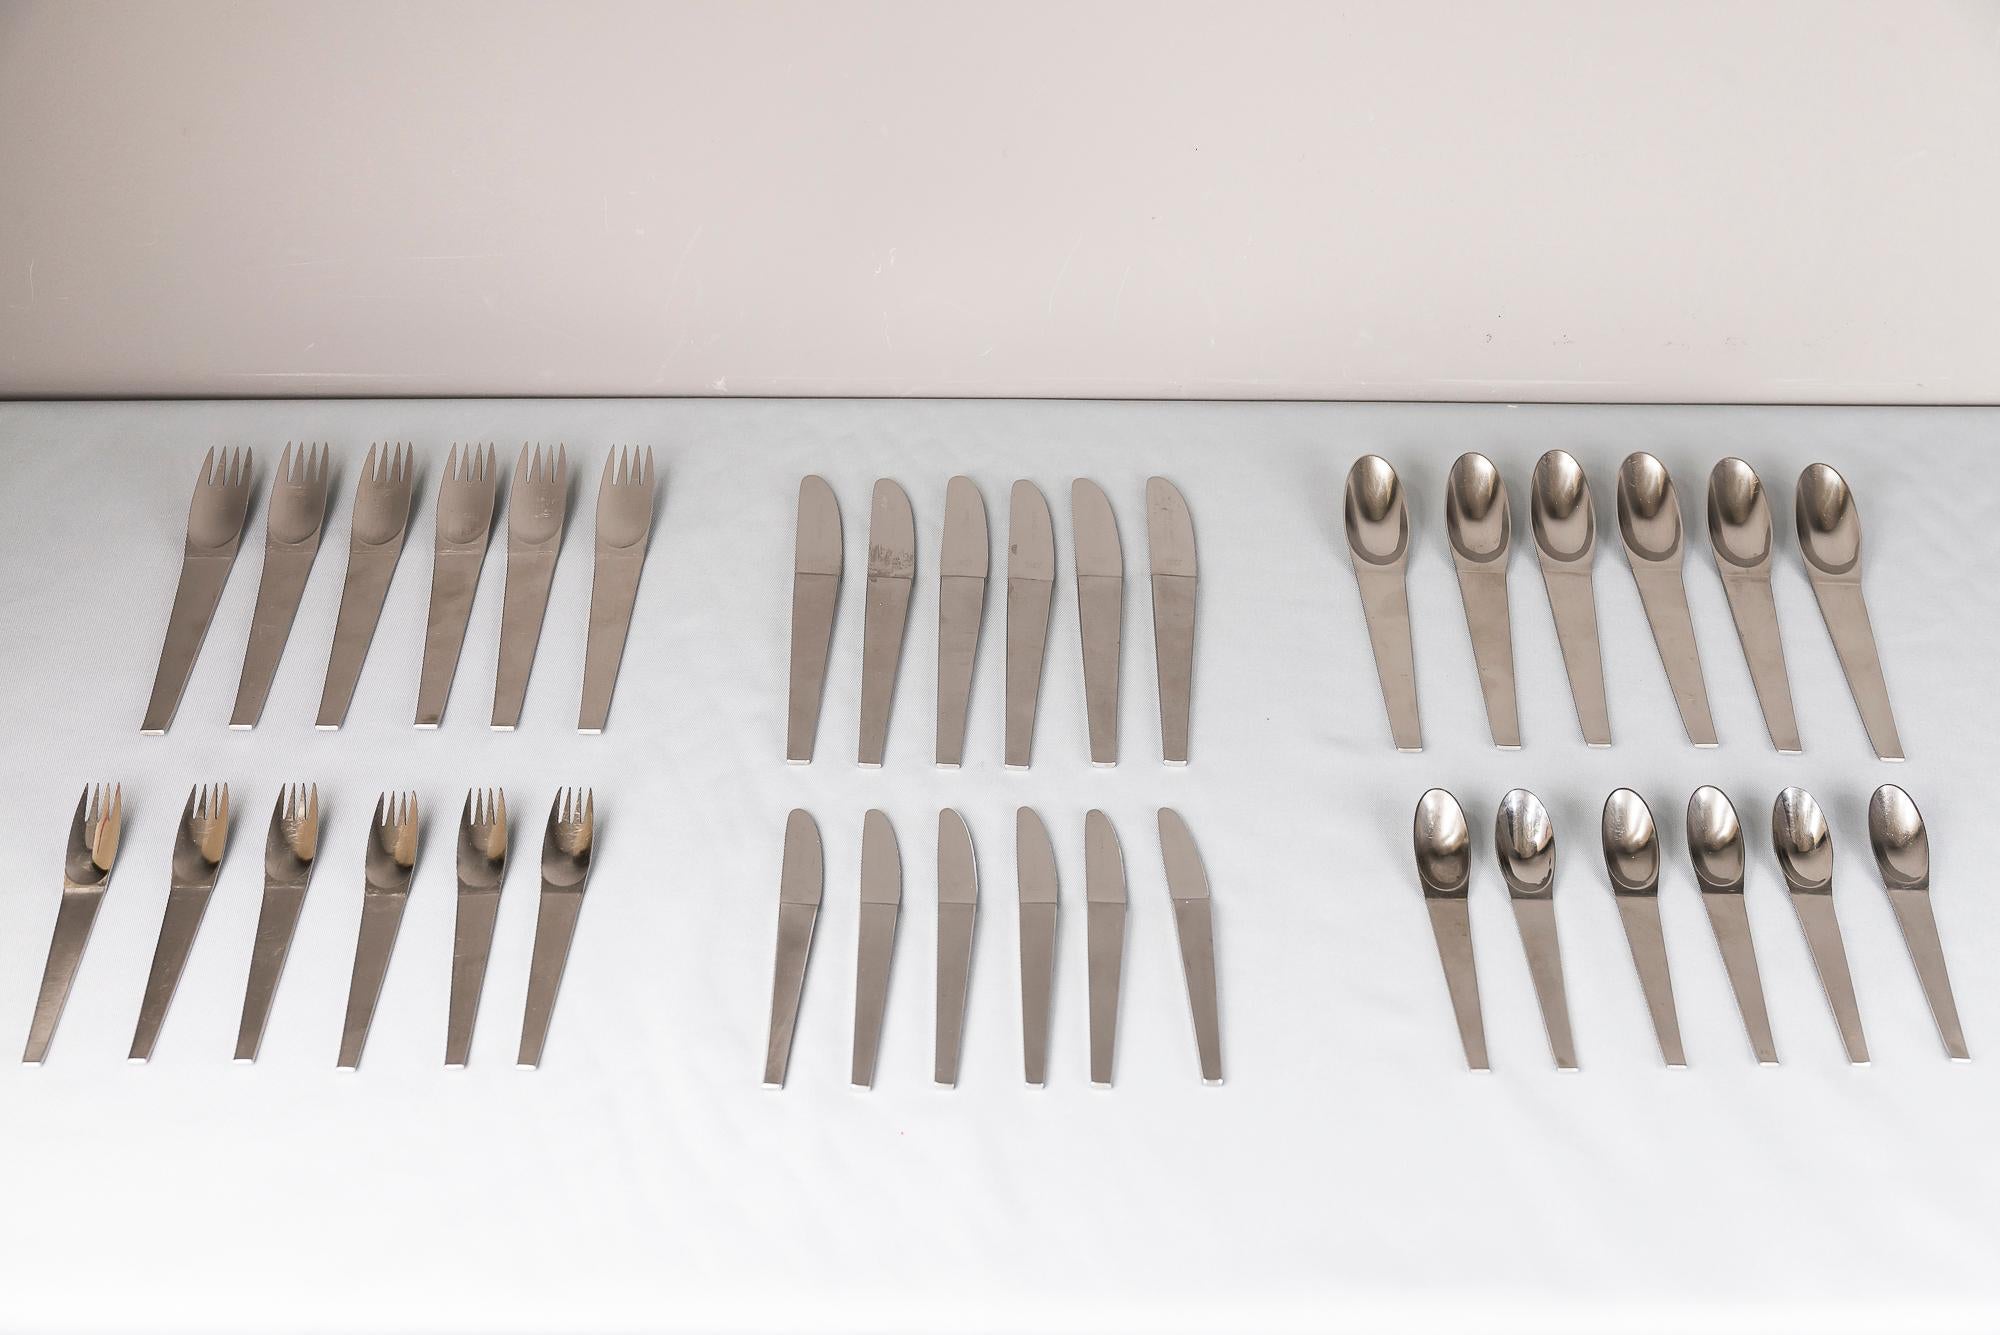 Austrian modernist flatware by Carl Auböck, Amboss Austria, 1950s
Original condition
Set consists of spoons, forks and knives
A set of 36 pieces
This set is for 6 persons
Marked (see last two Images)

Measures: Spoons high 19.5cm, wide 3cm,